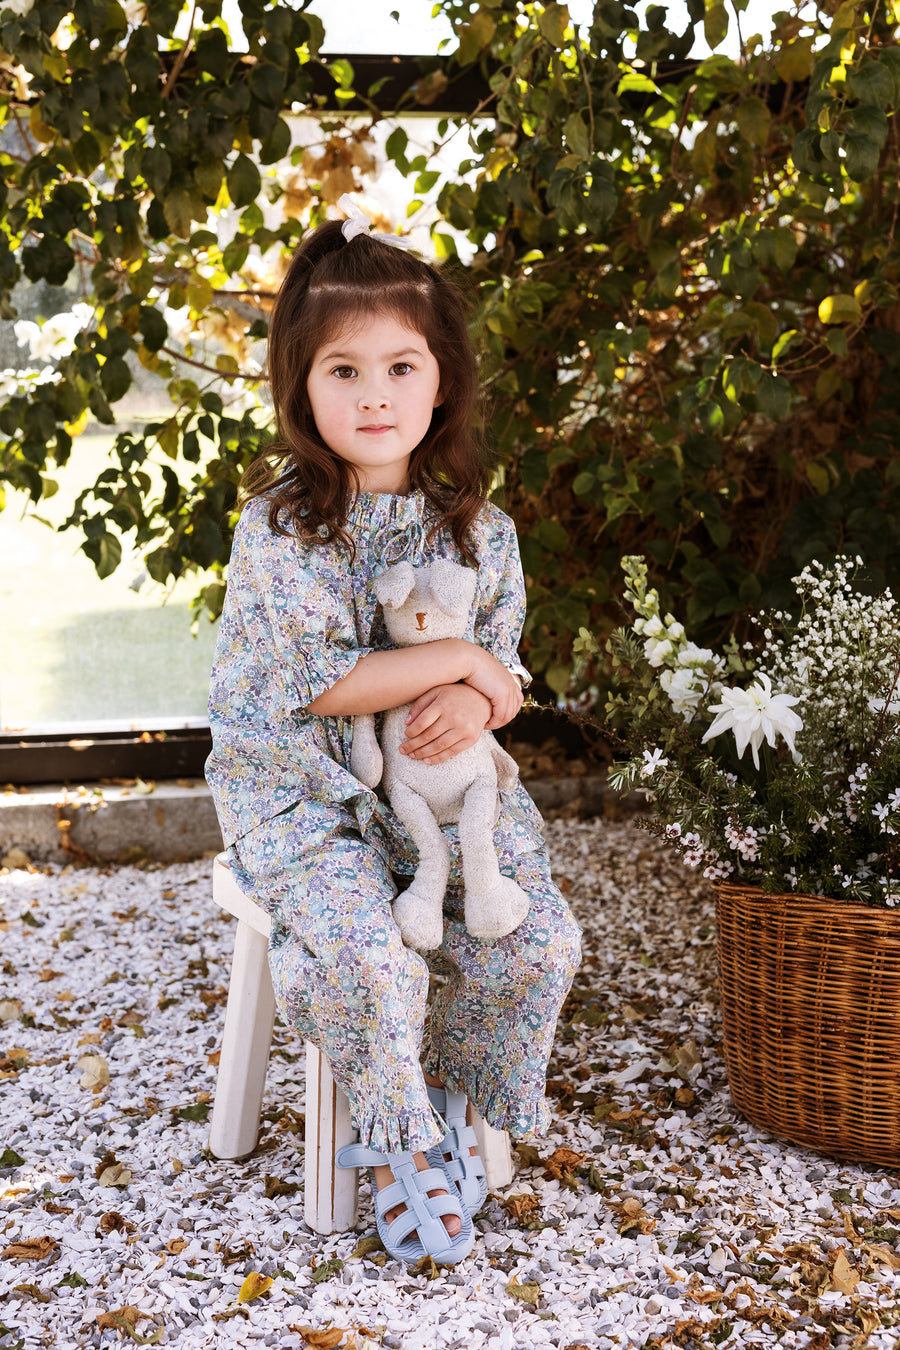 Girl sitting on a stool holding onto her bunny. She wears a Liberty floral top, matching pants and blue sandals.